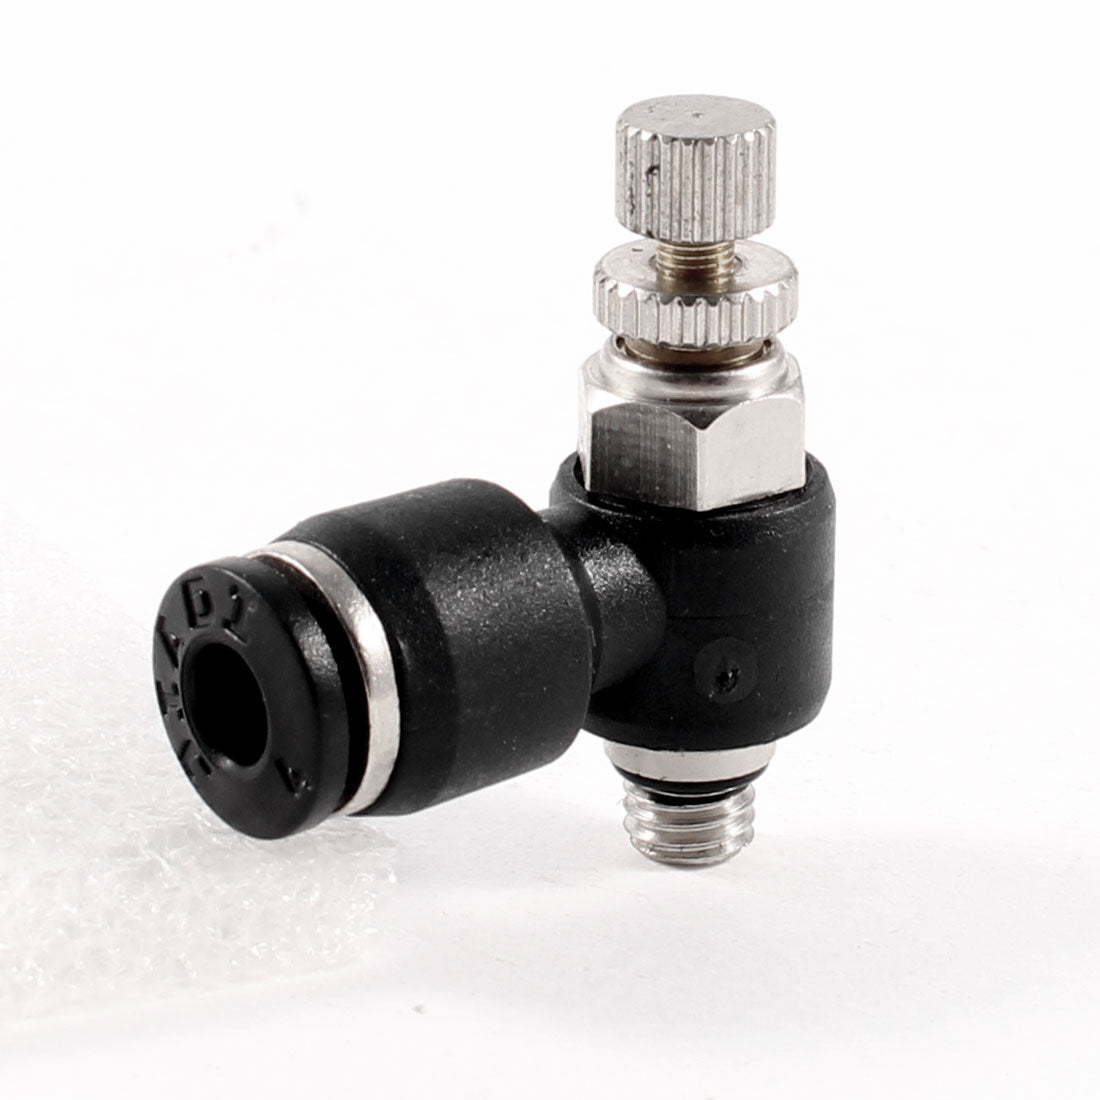 uxcell Uxcell 5mm M5 Male Thread 4mm Tube Push In Fitting Speed Flow Controller Air Valve